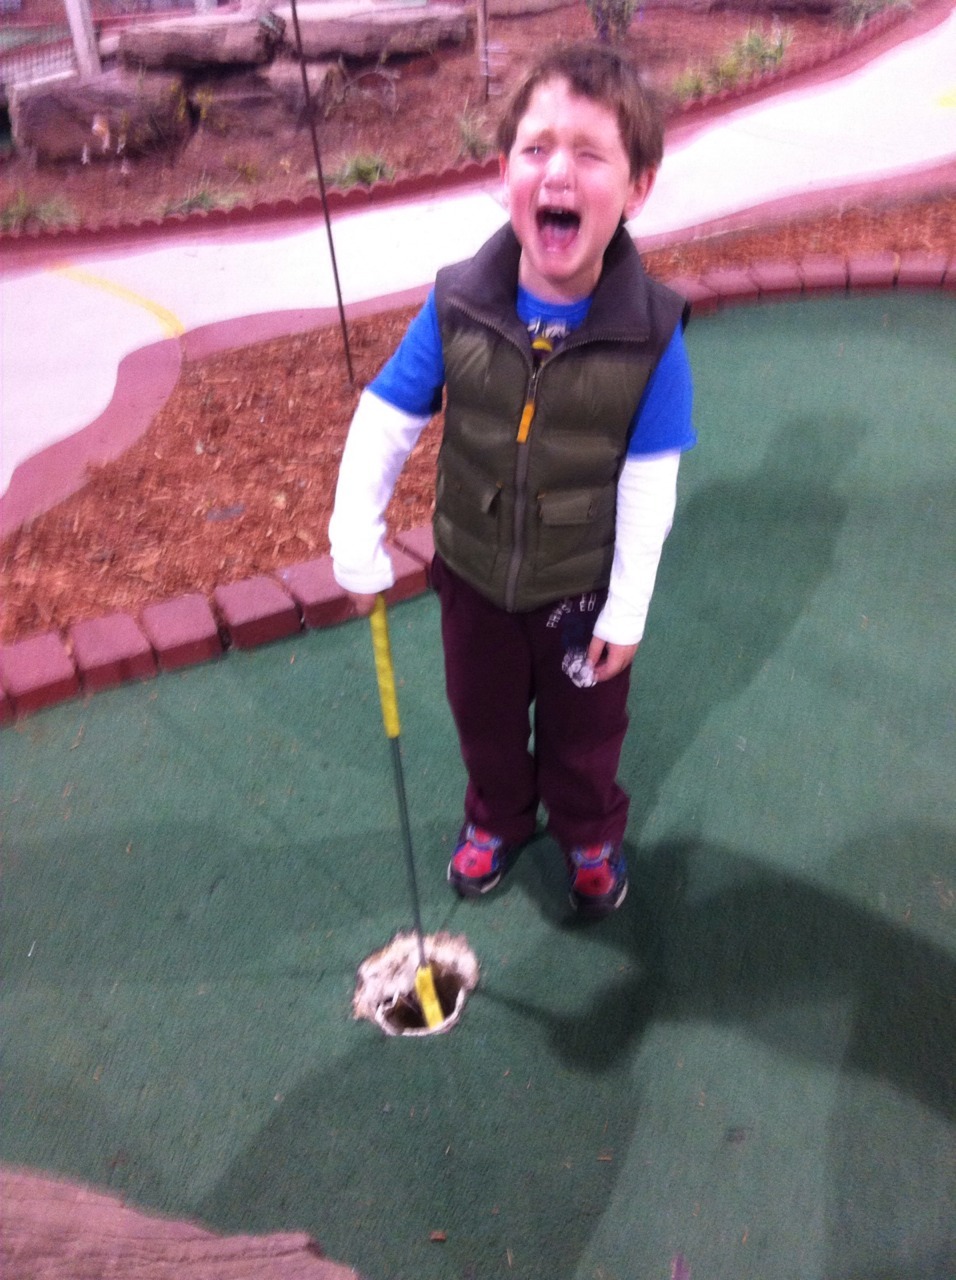 "…he found out it was over after 18 holes."<br />
Submitted By: Pascale<br />
Location: New York, United States